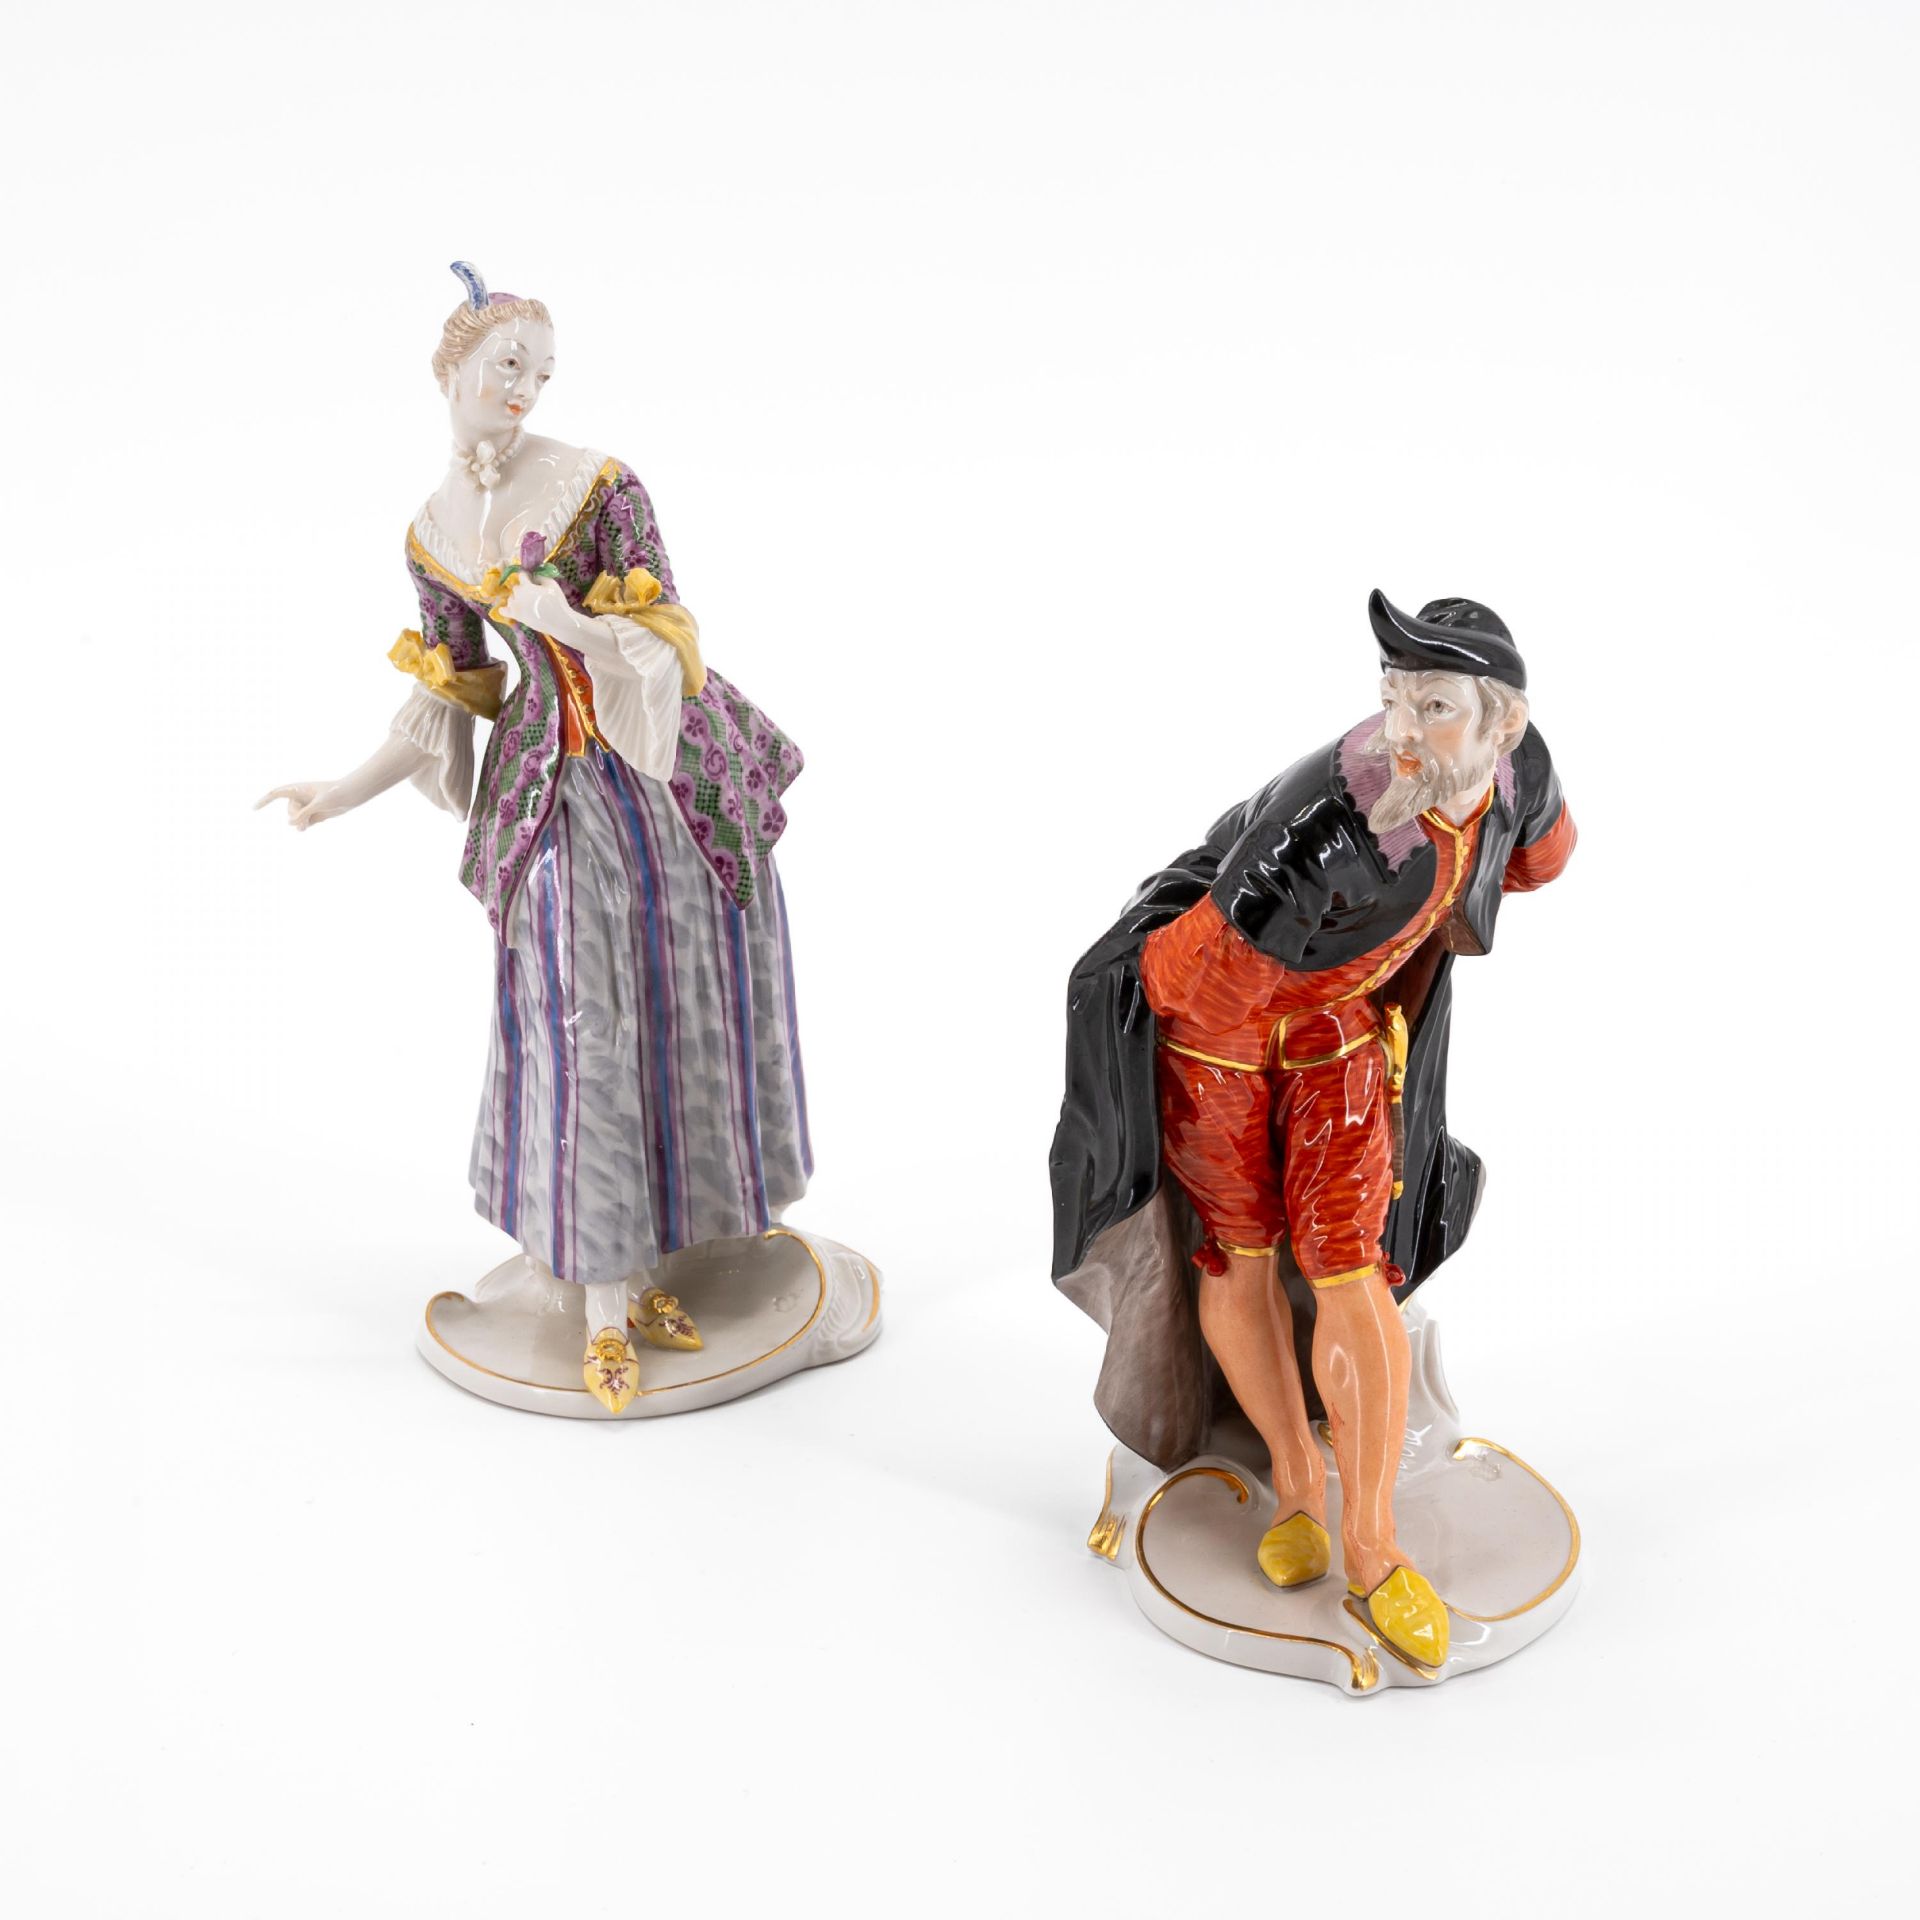 Nymphenburg: LUCINDA AND PANTALONE FROM THE 'COMMEDIA DELL'ARTE'